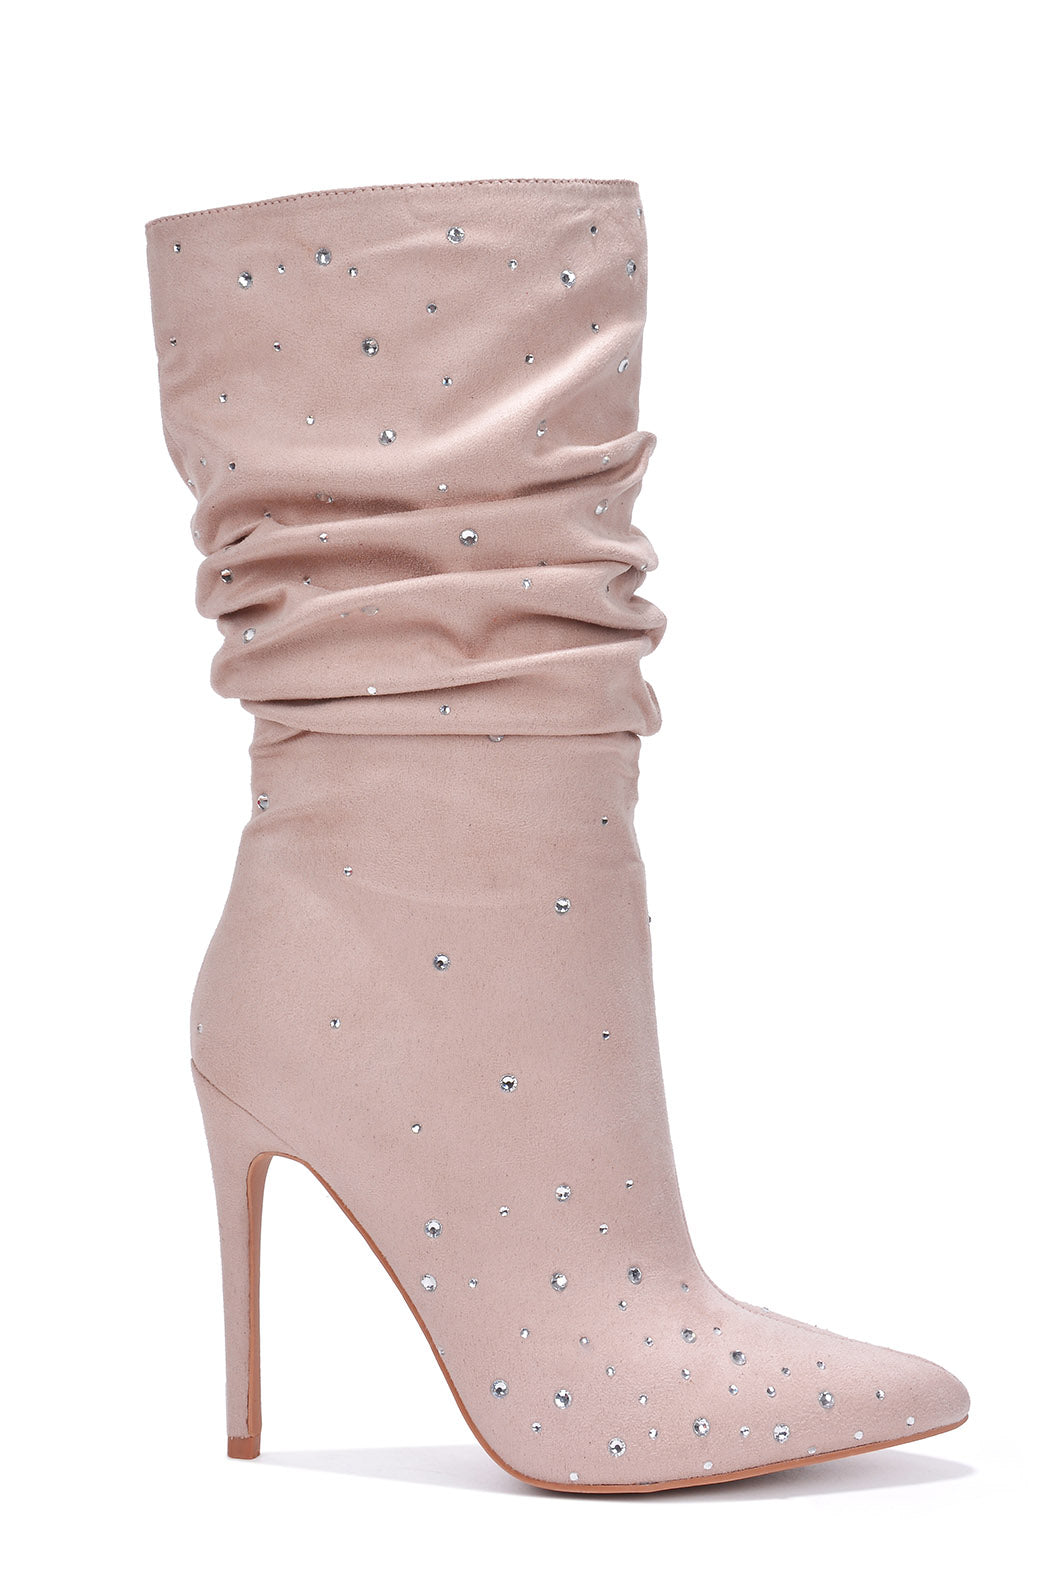 Cape Robbin - FANCIFIED - NUDE - BOOTIES